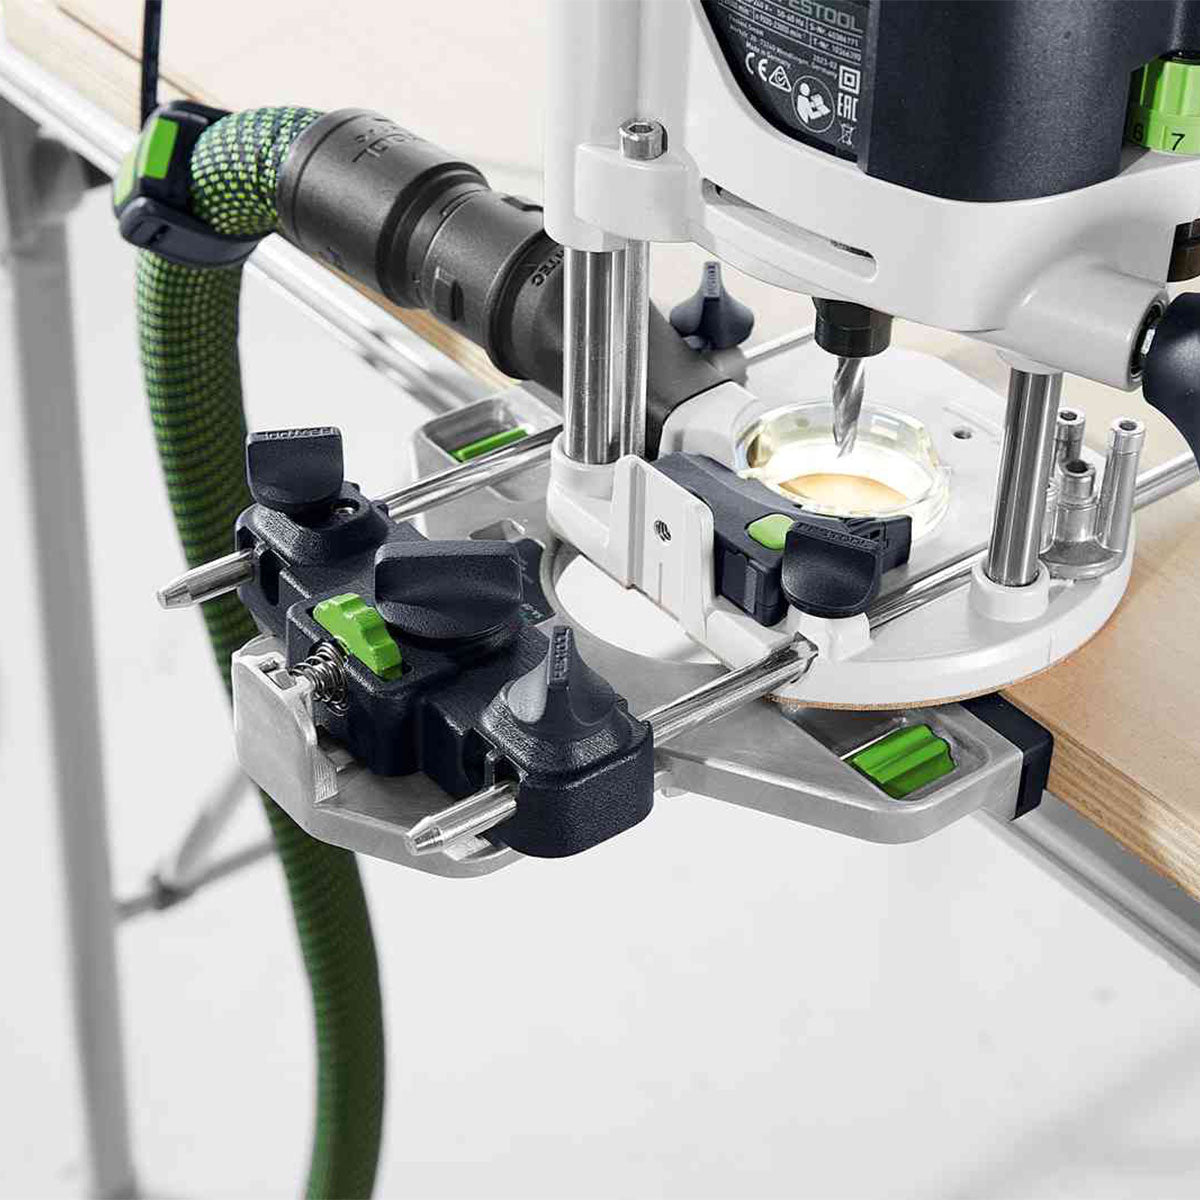 Festool OF 1010 REQ-Plus 110V GB Router Cutter - 578018 With Accessories Set & Guide Rail FS 800/2